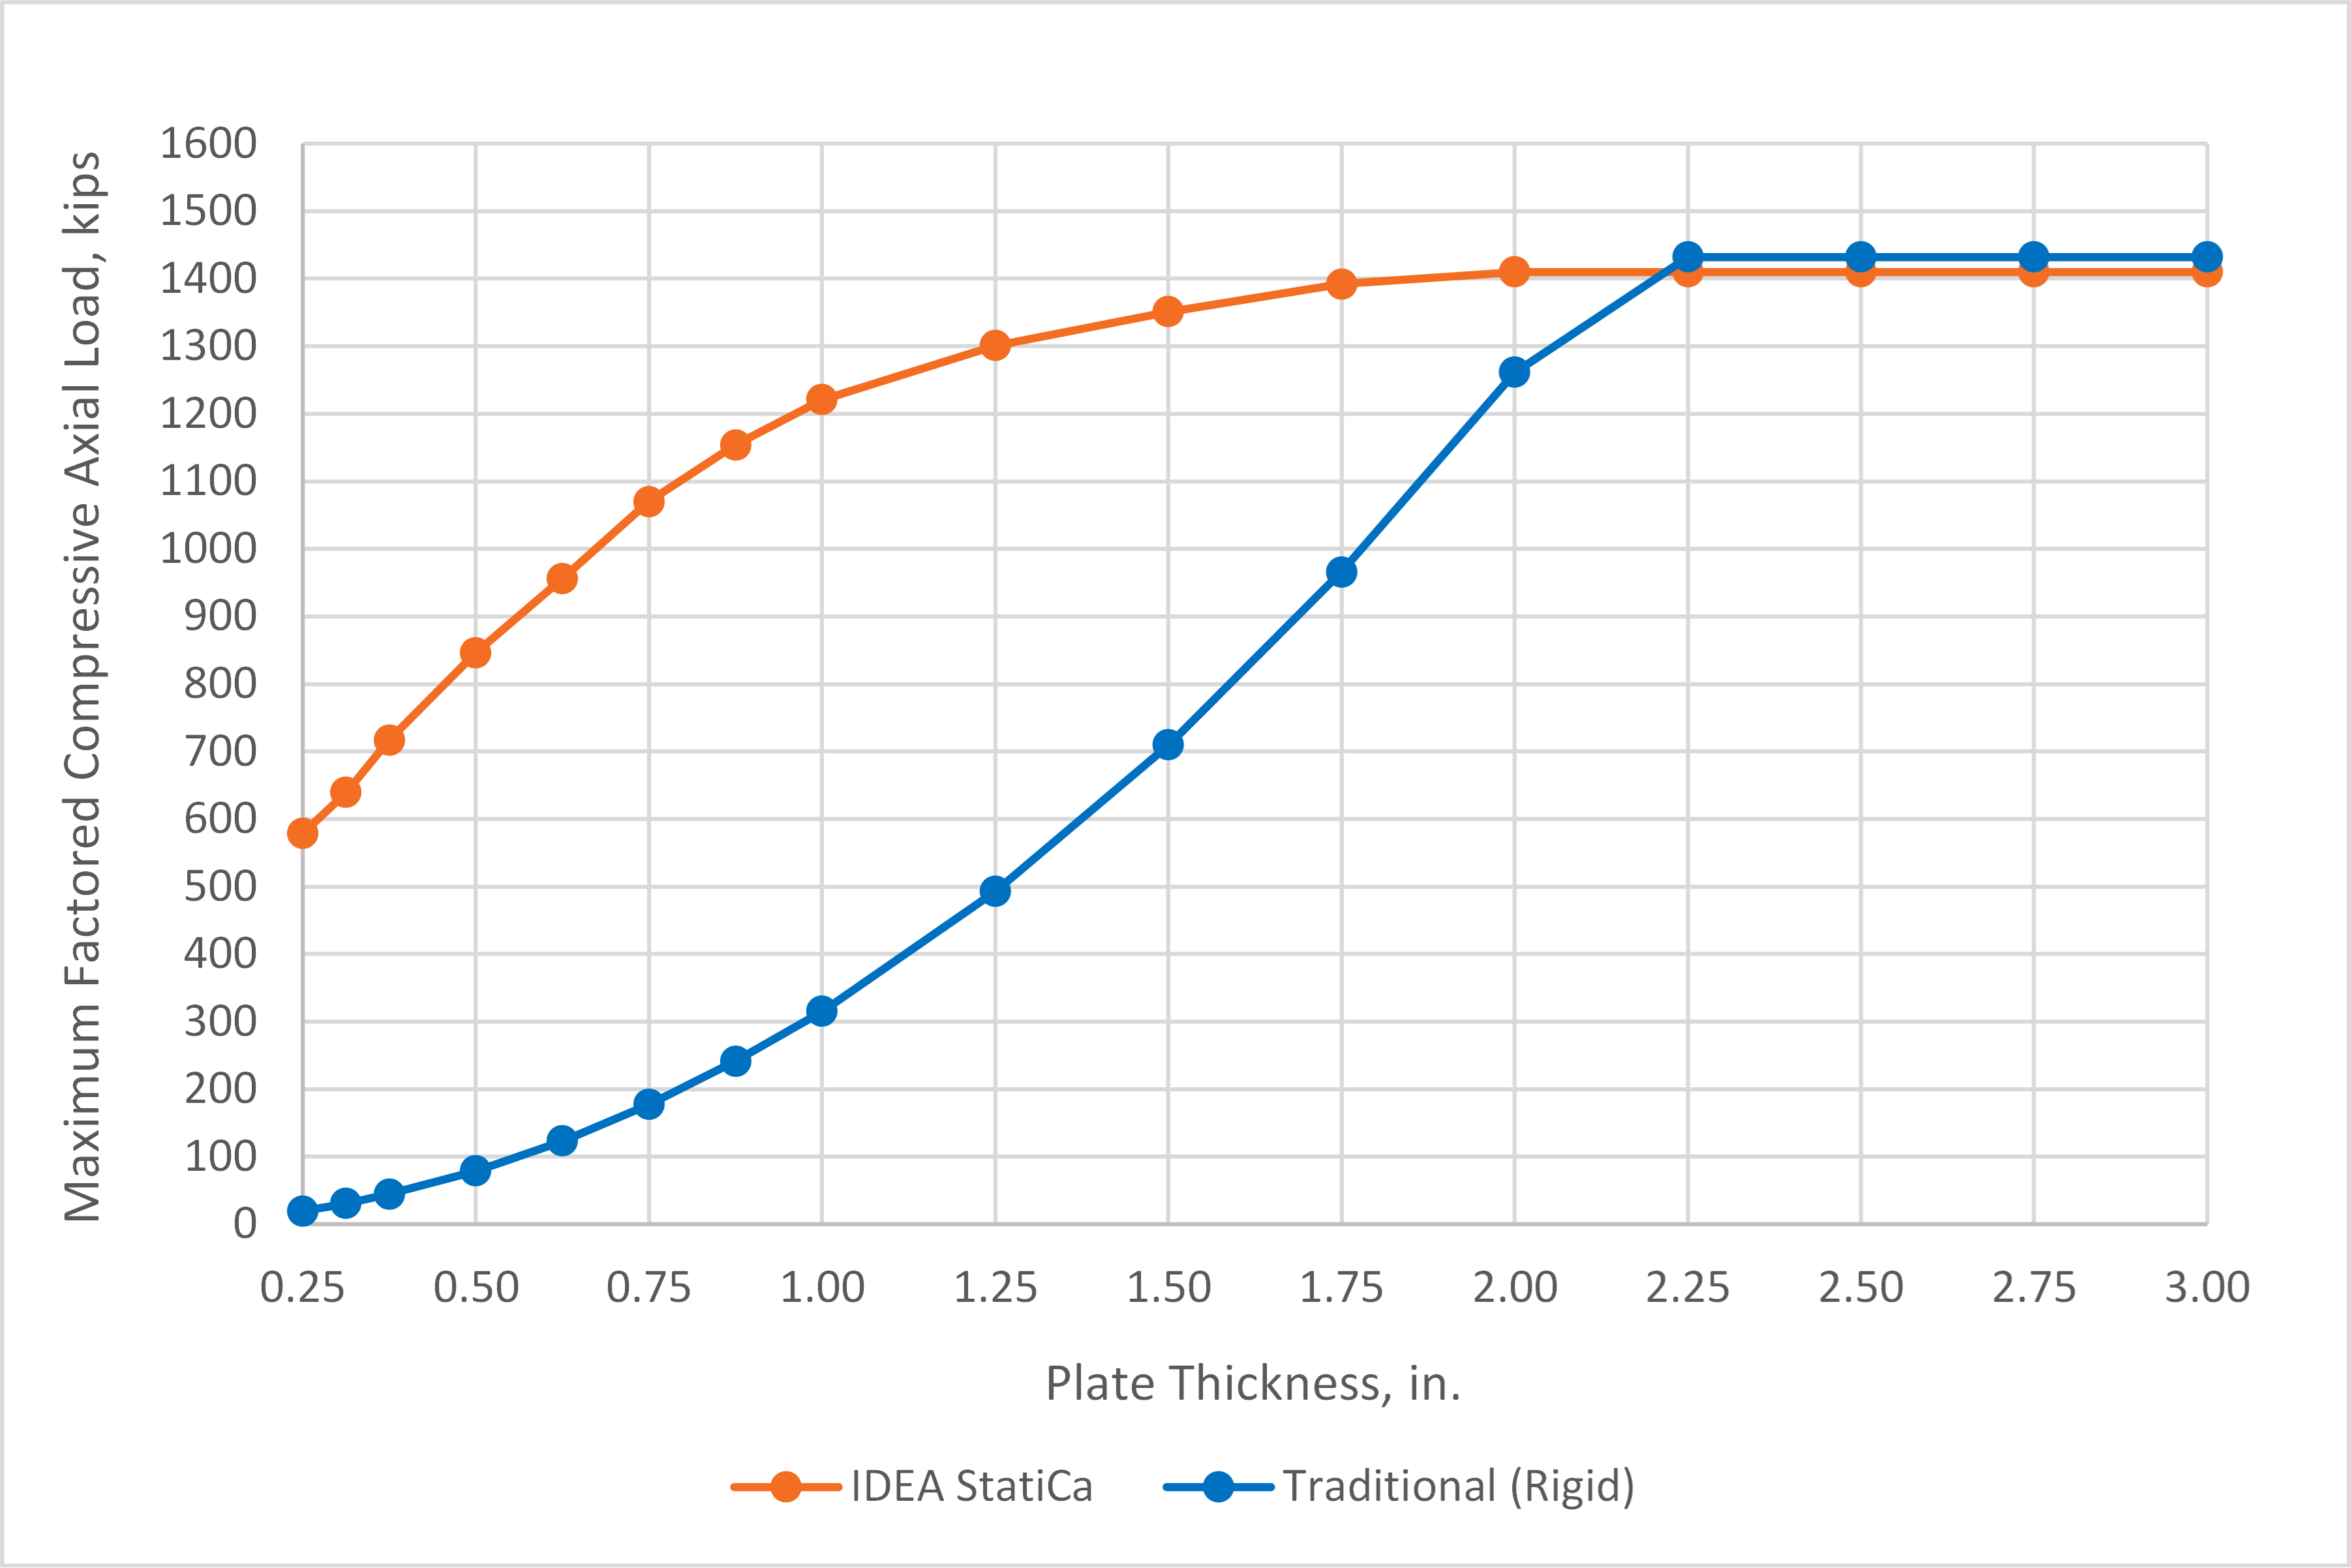 Maximum factored compressive axial load vs. plate thickness for base plate with wide flange column